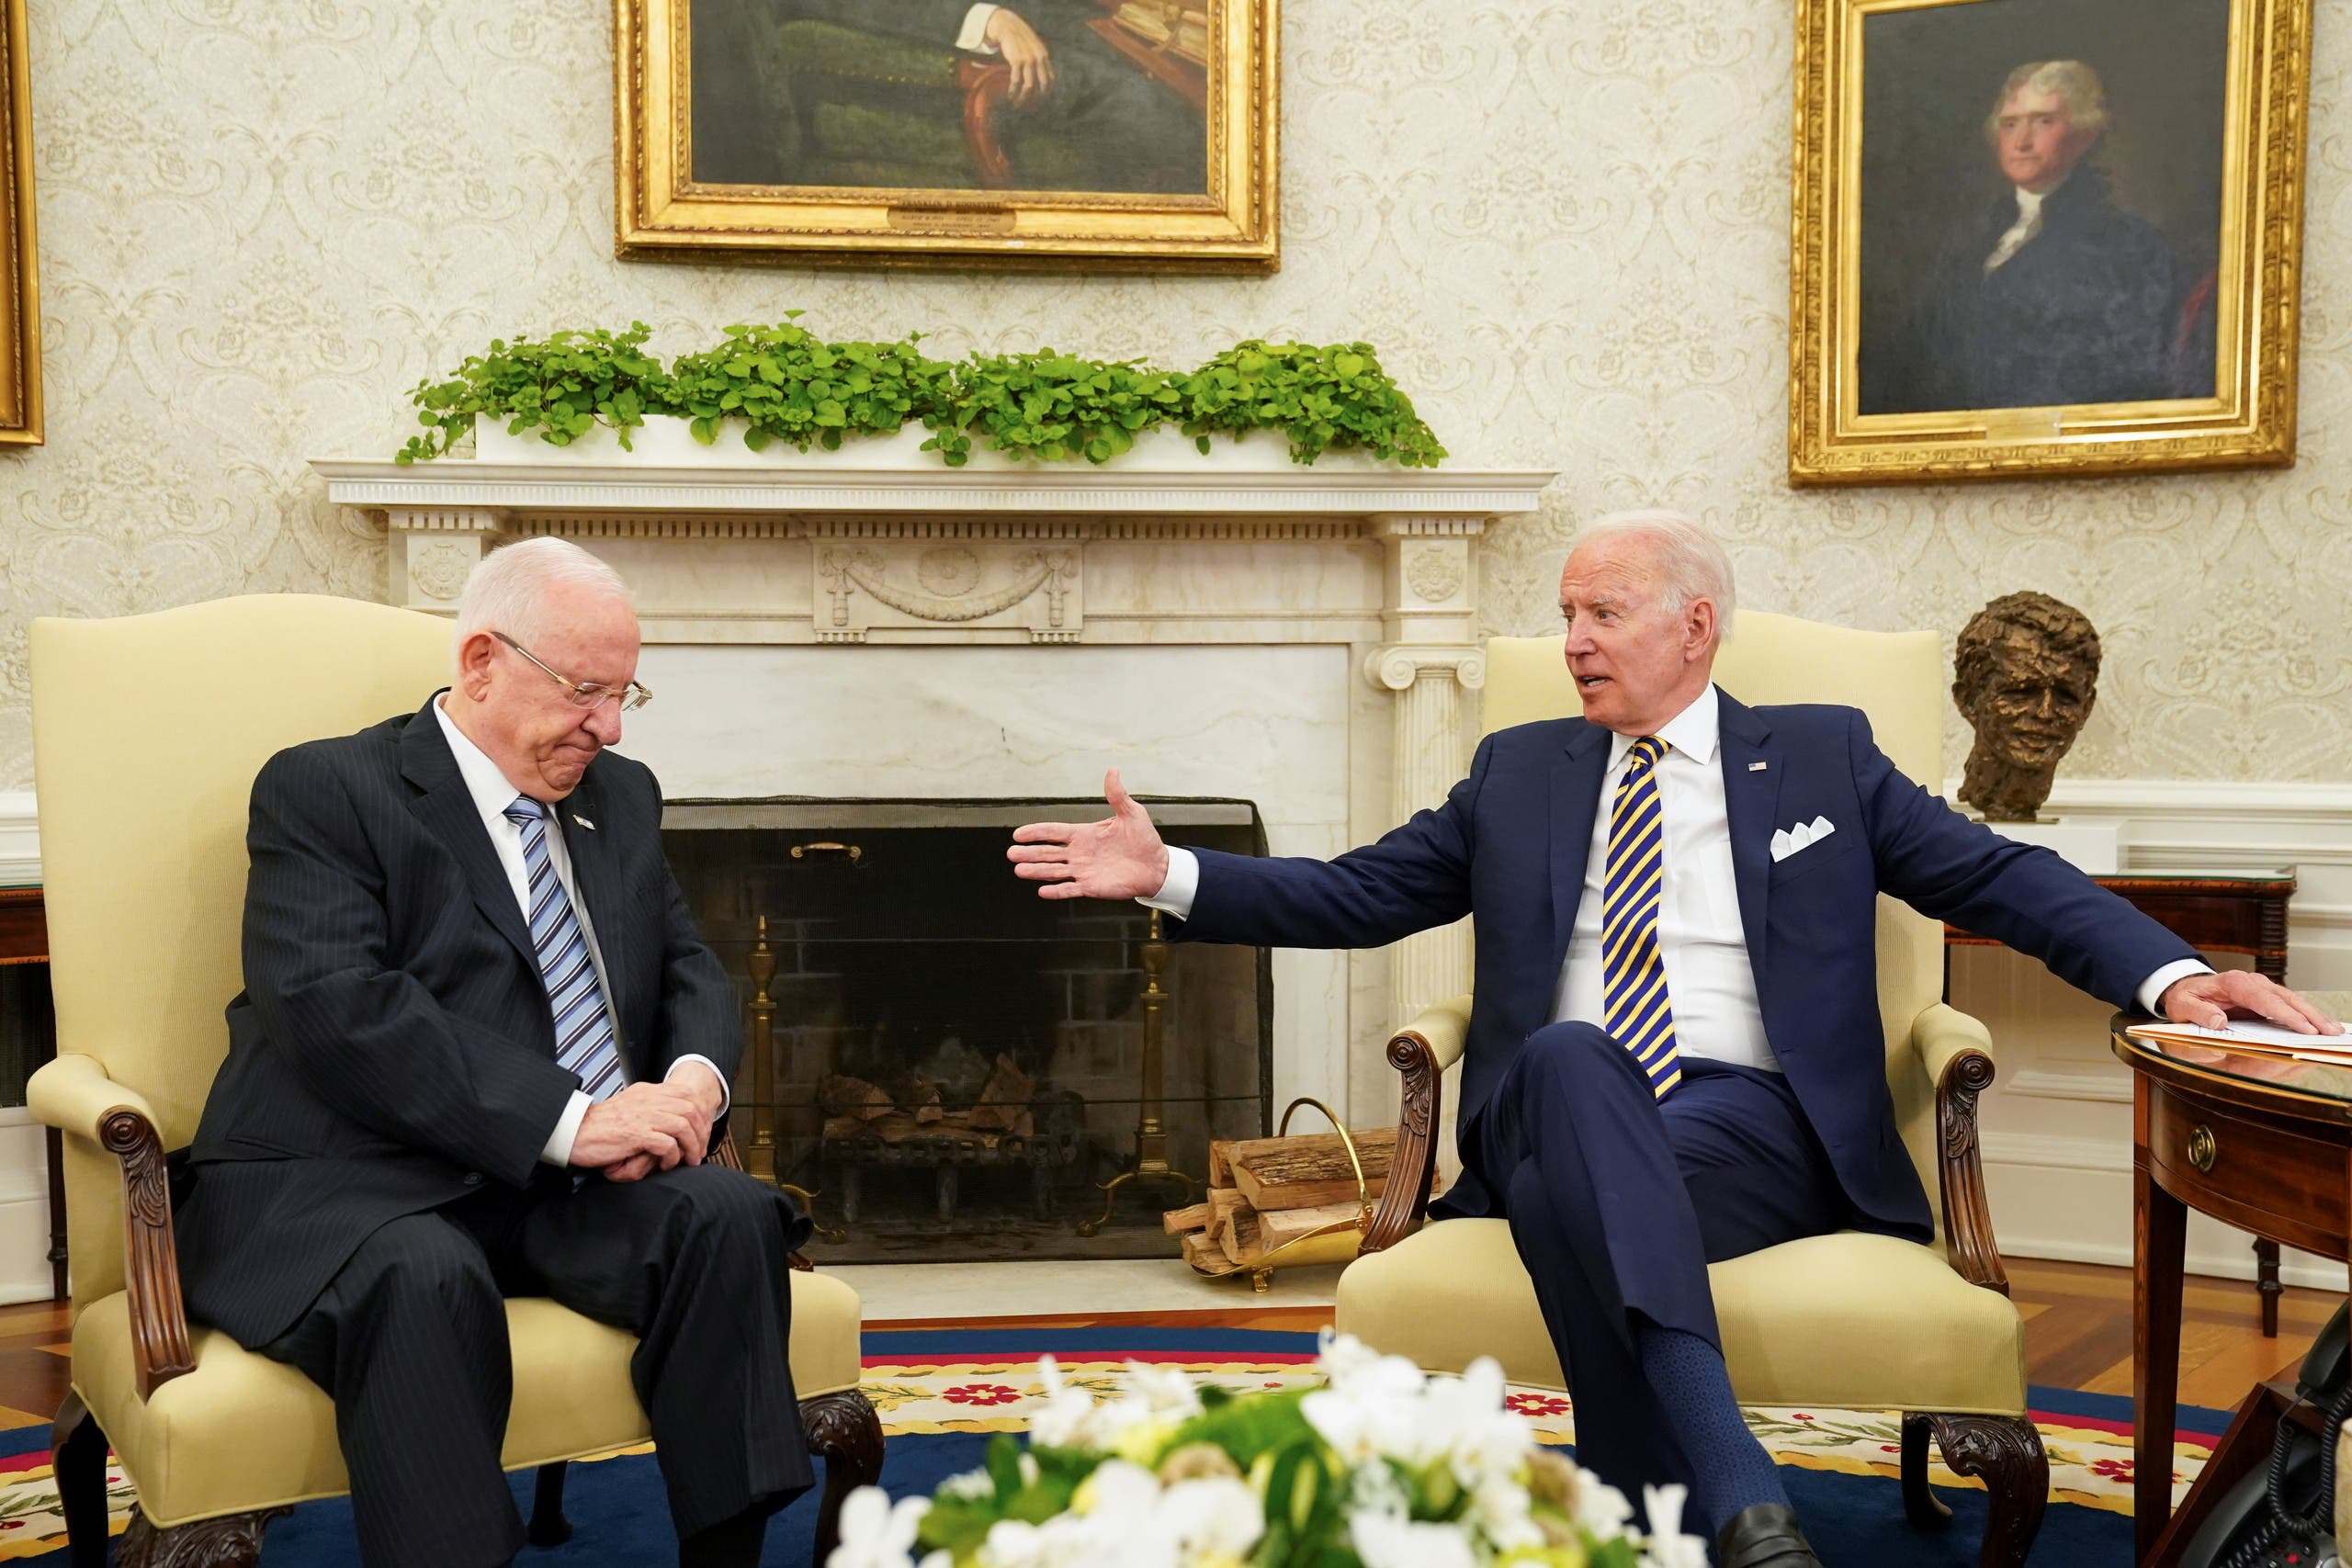 US President Joe Biden meets with Israel's President Reuven Rivlin at the White House in Washington, US June 28, 2021. (Reuters)